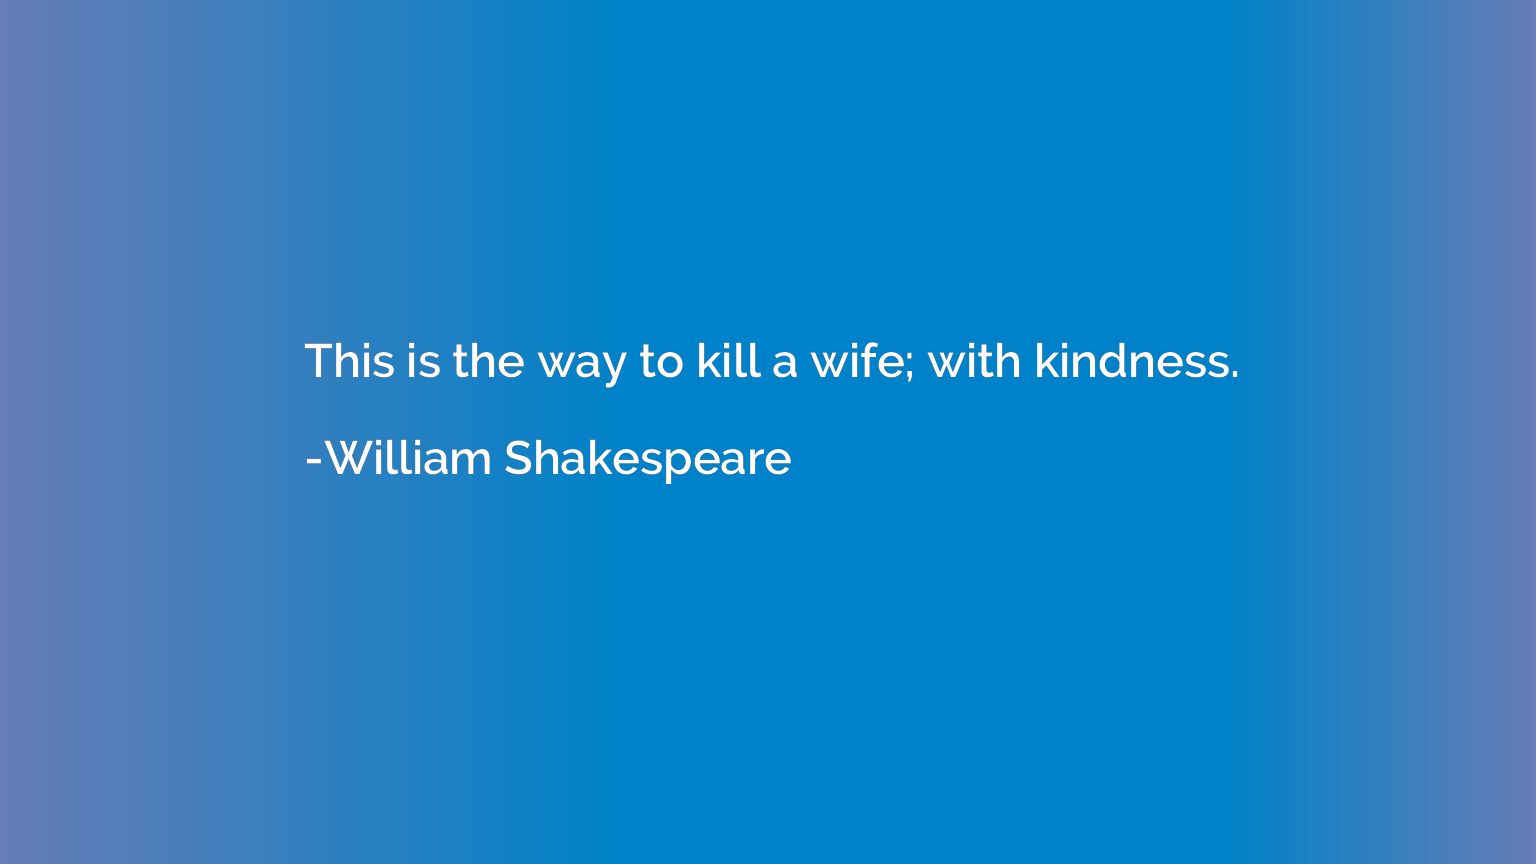 This is the way to kill a wife; with kindness.